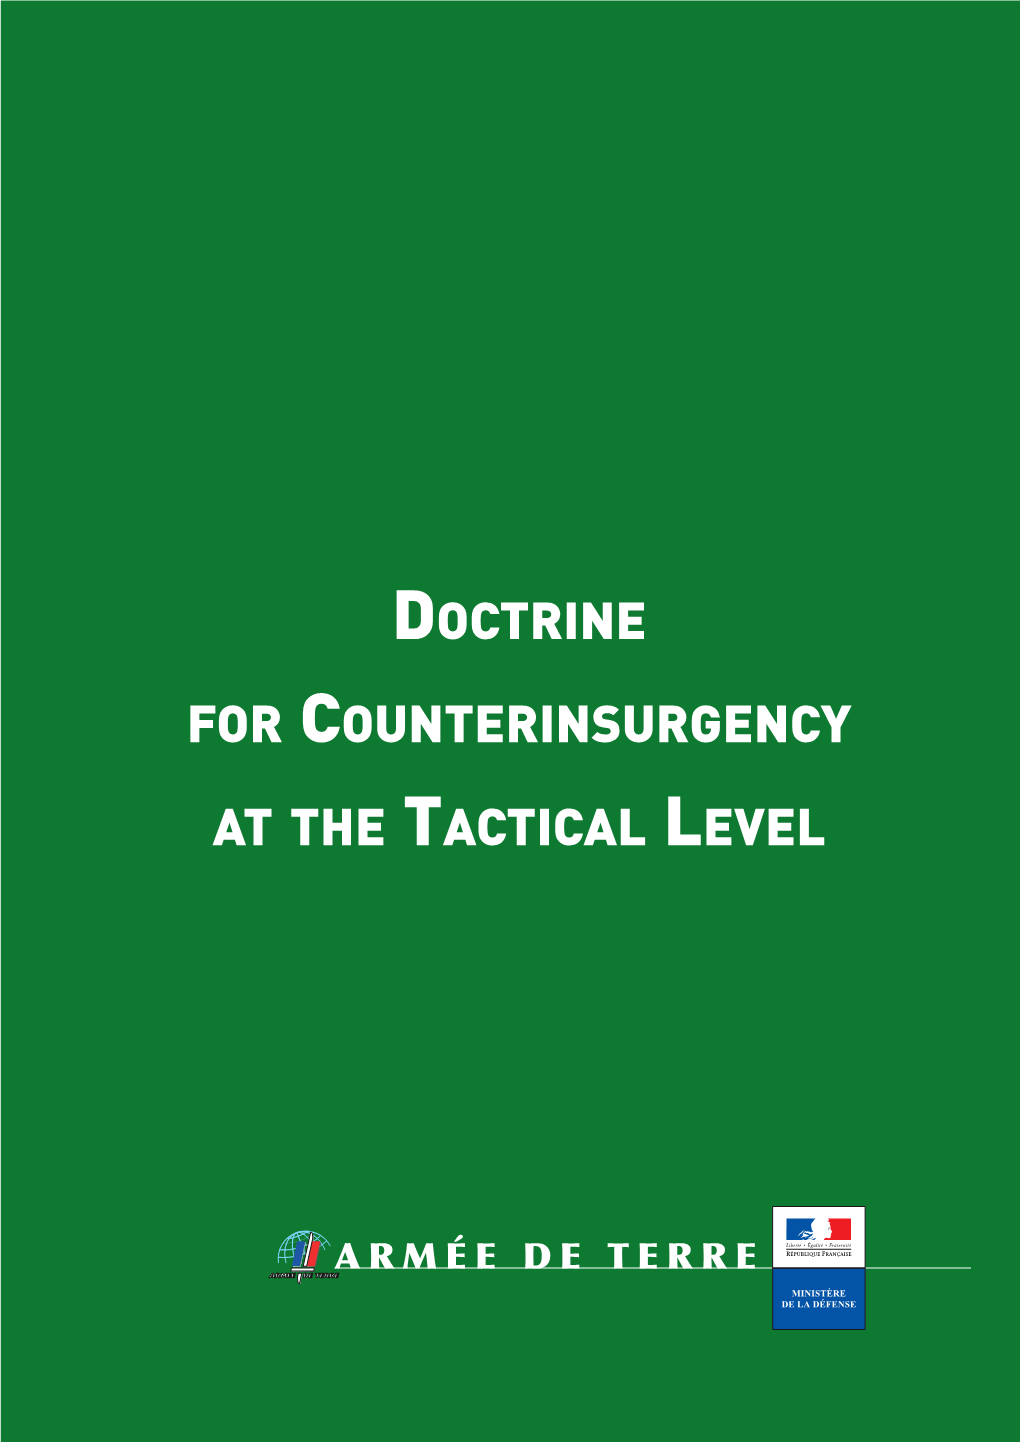 Doctrine for Counterinsurgency at the Tactical Level